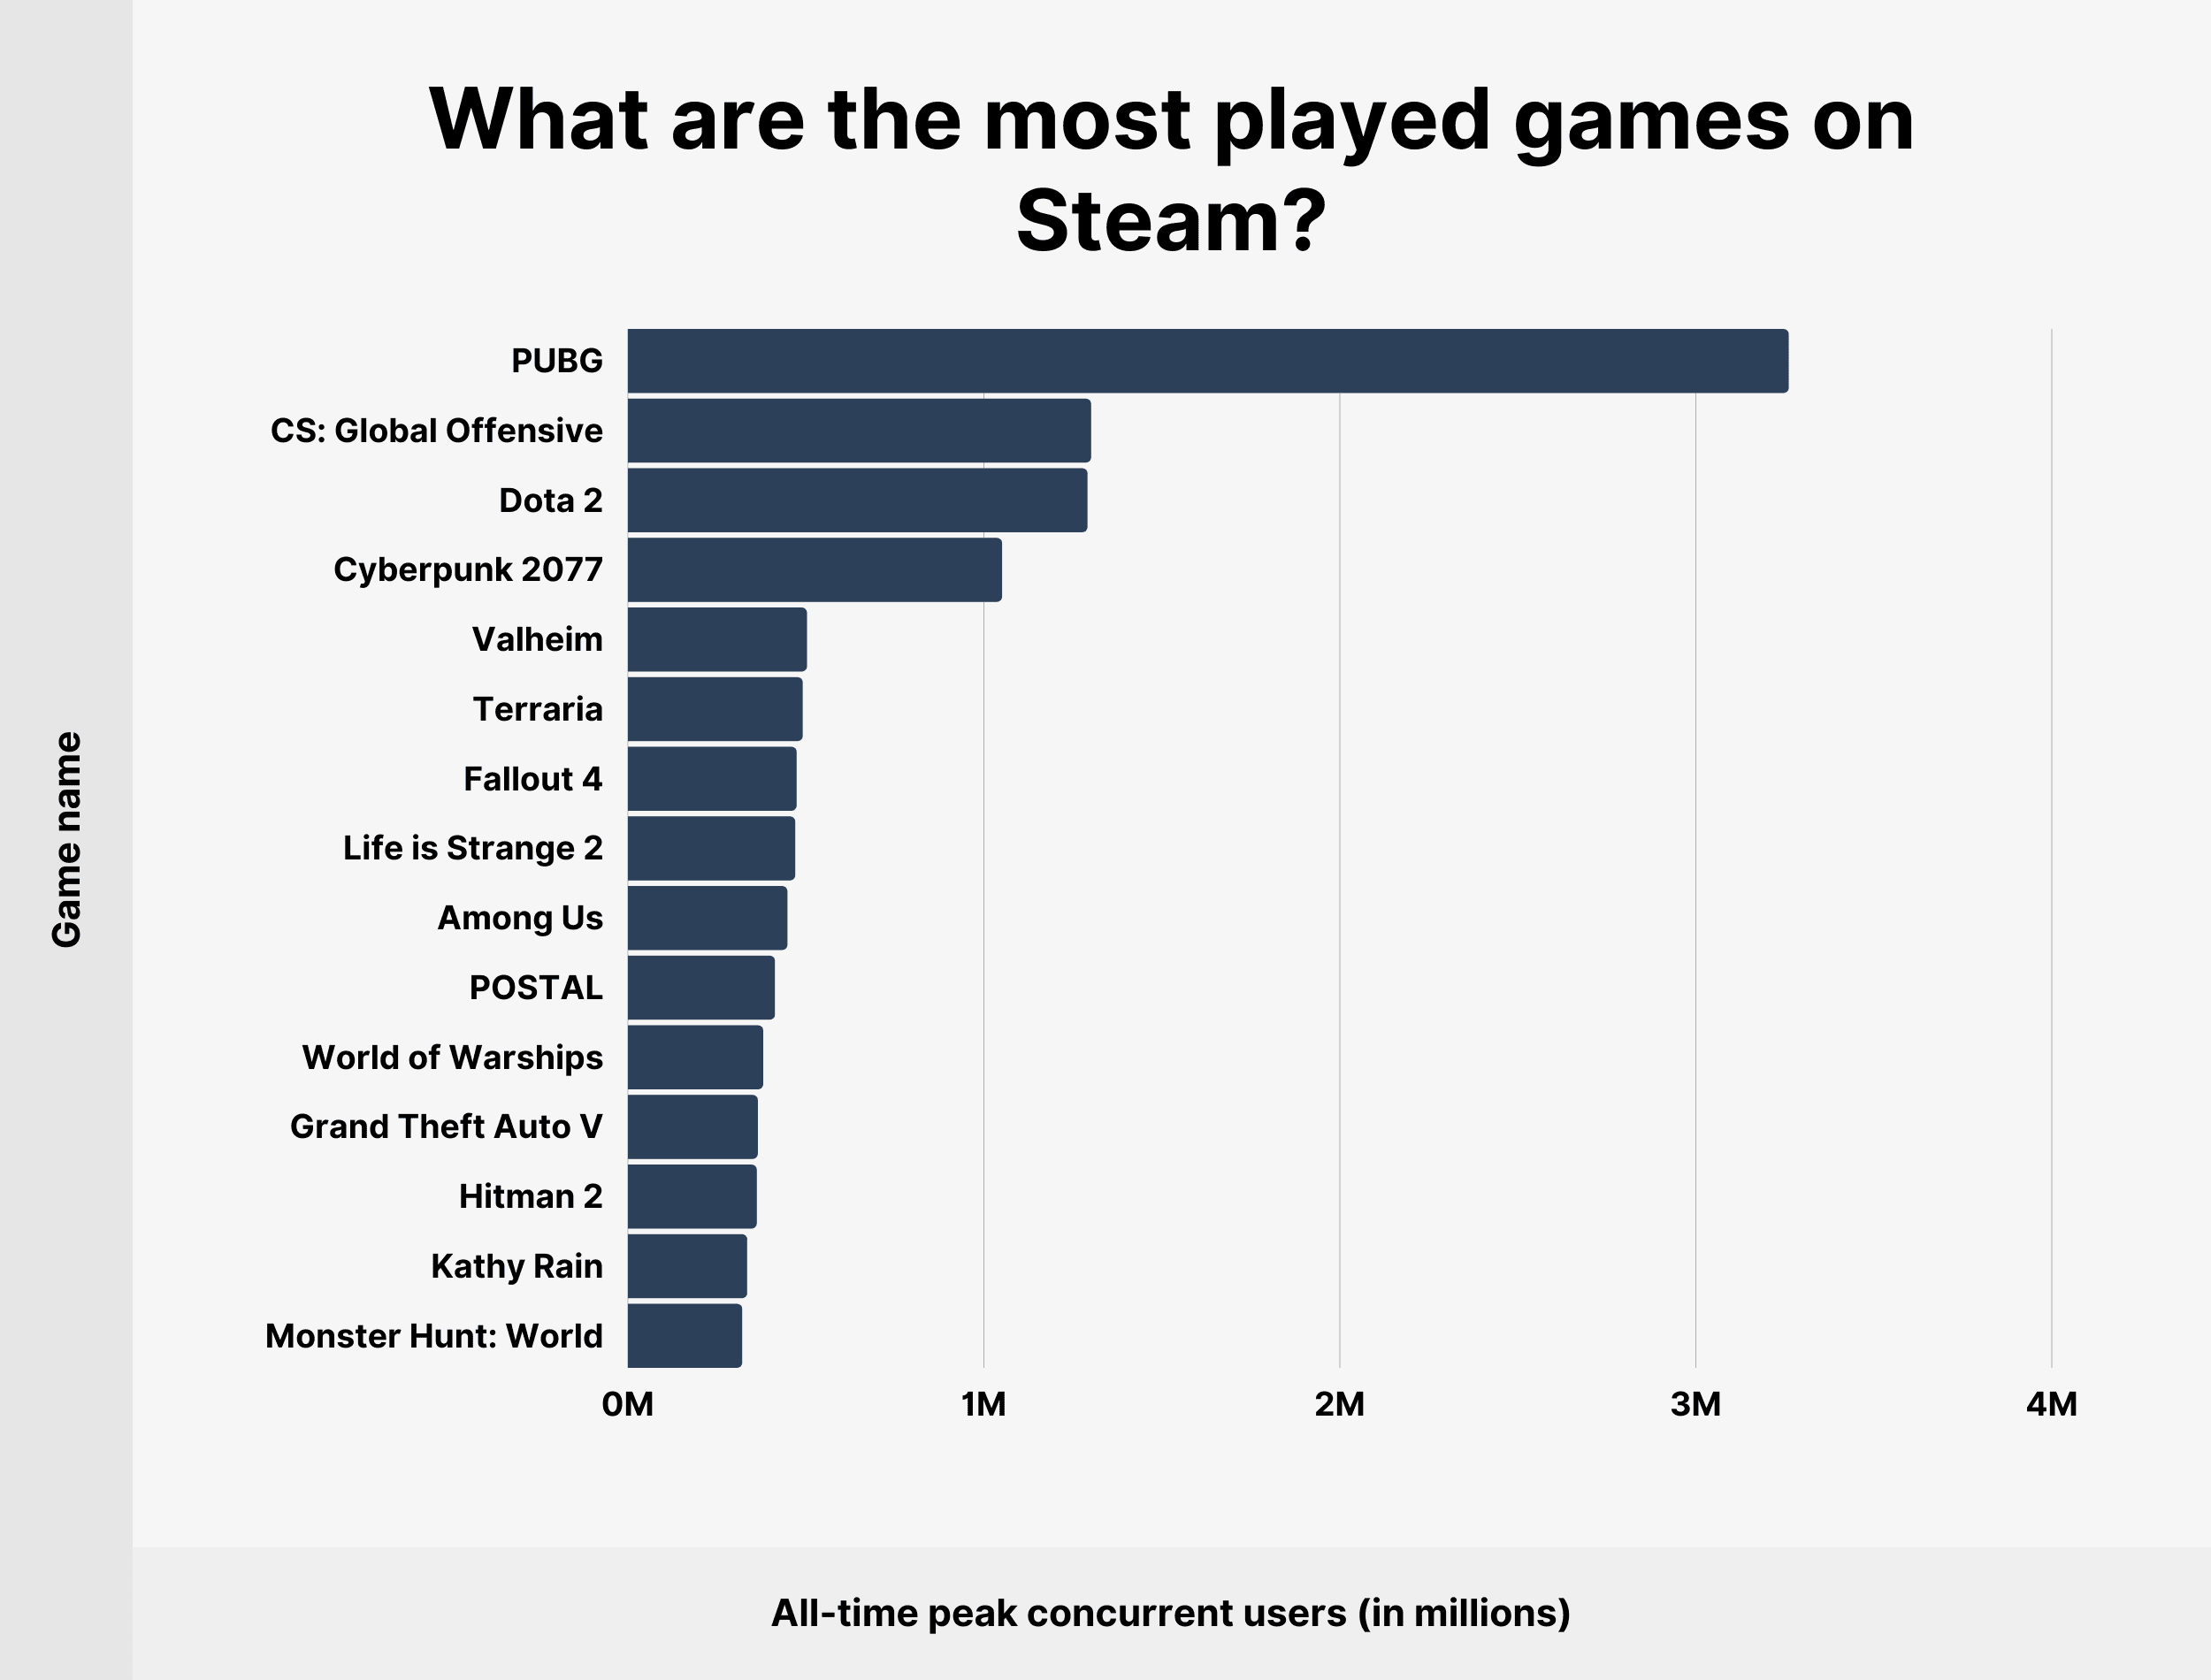 What are the most played games on Steam?